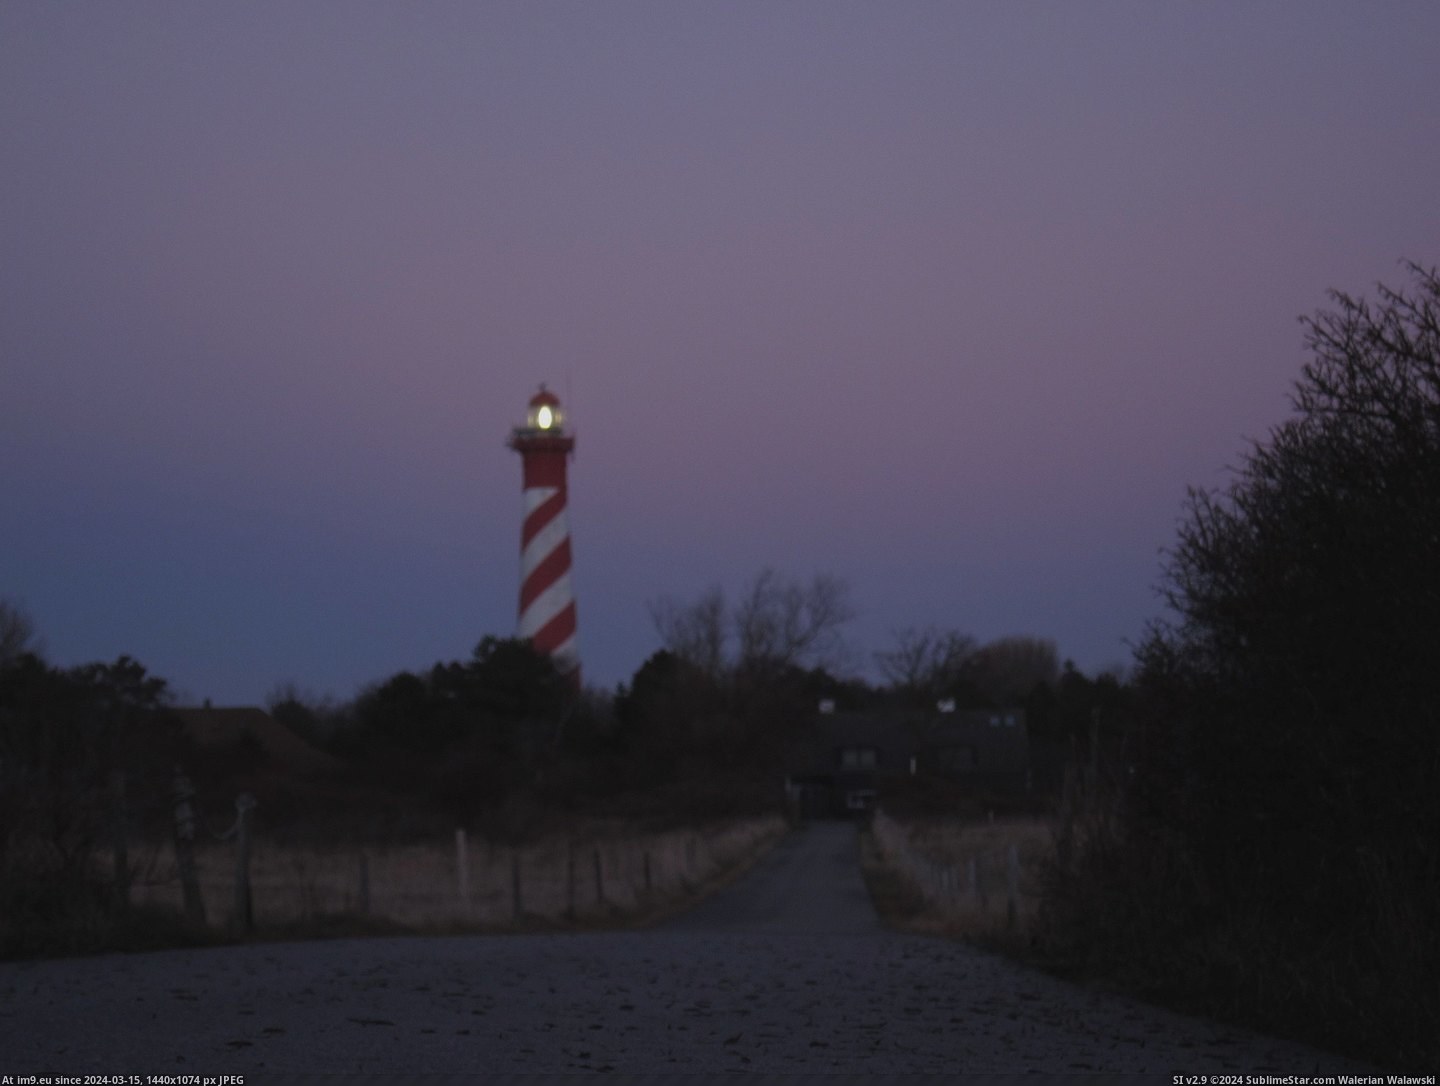 #Evening #Autumn #Peaceful #Netherlands #Lighthouse [Earthporn] Peaceful autumn evening on the lighthouse, the Netherlands [2816×2112] Pic. (Image of album My r/EARTHPORN favs))